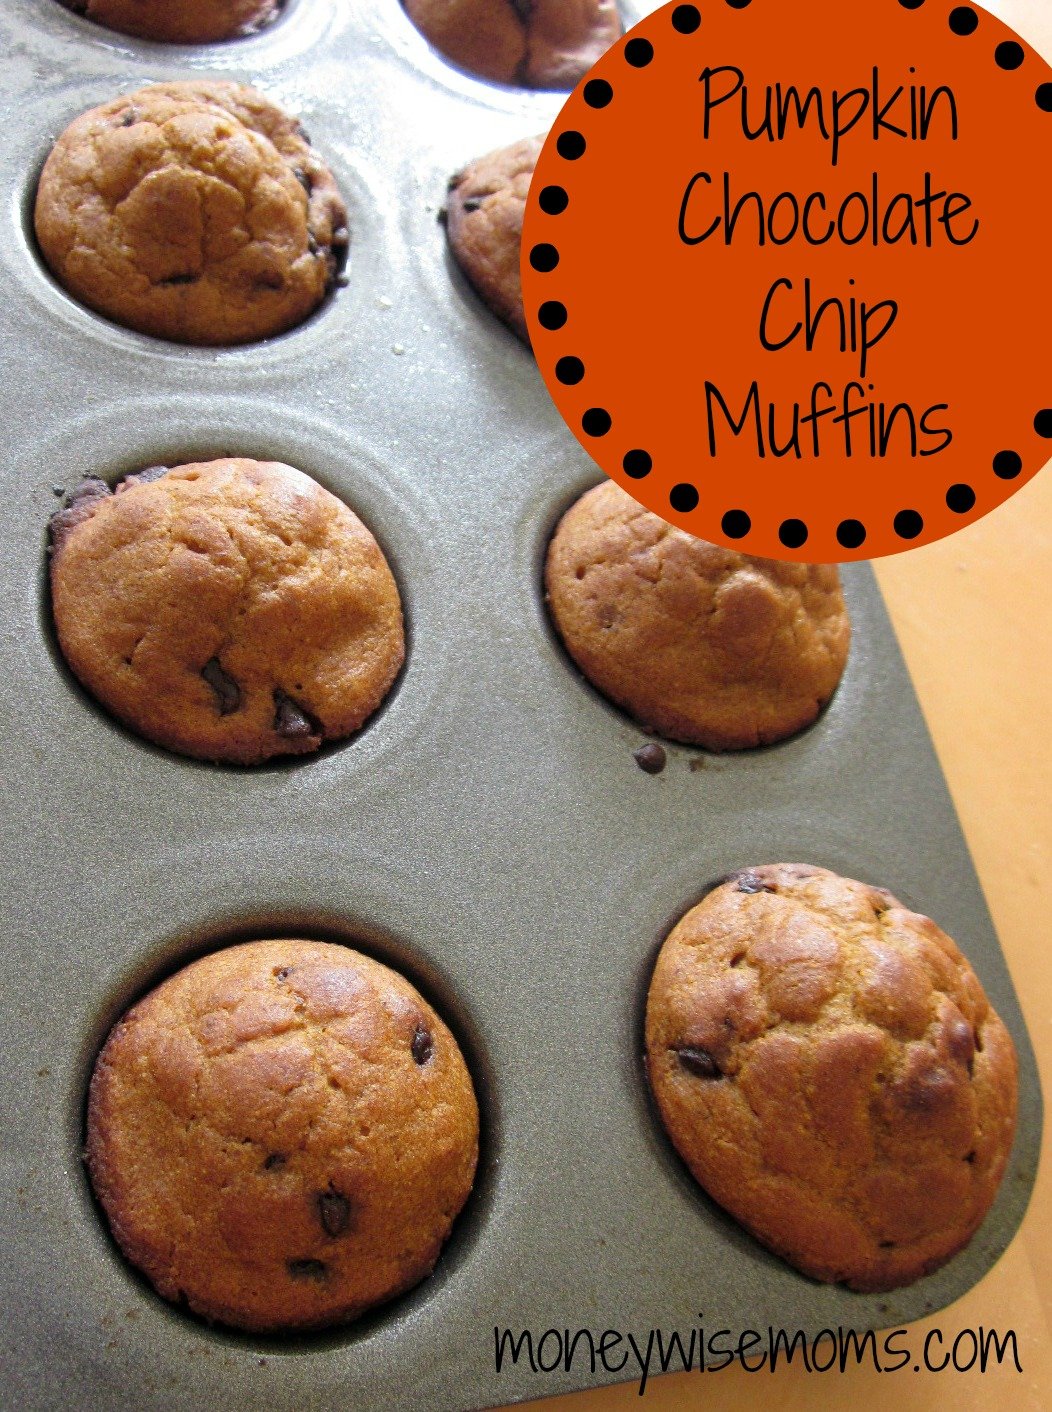 Pumpkin Chocolate Chip Muffins - filled with whole wheat & extra fiber - the perfect lunchbox or afterschool treat